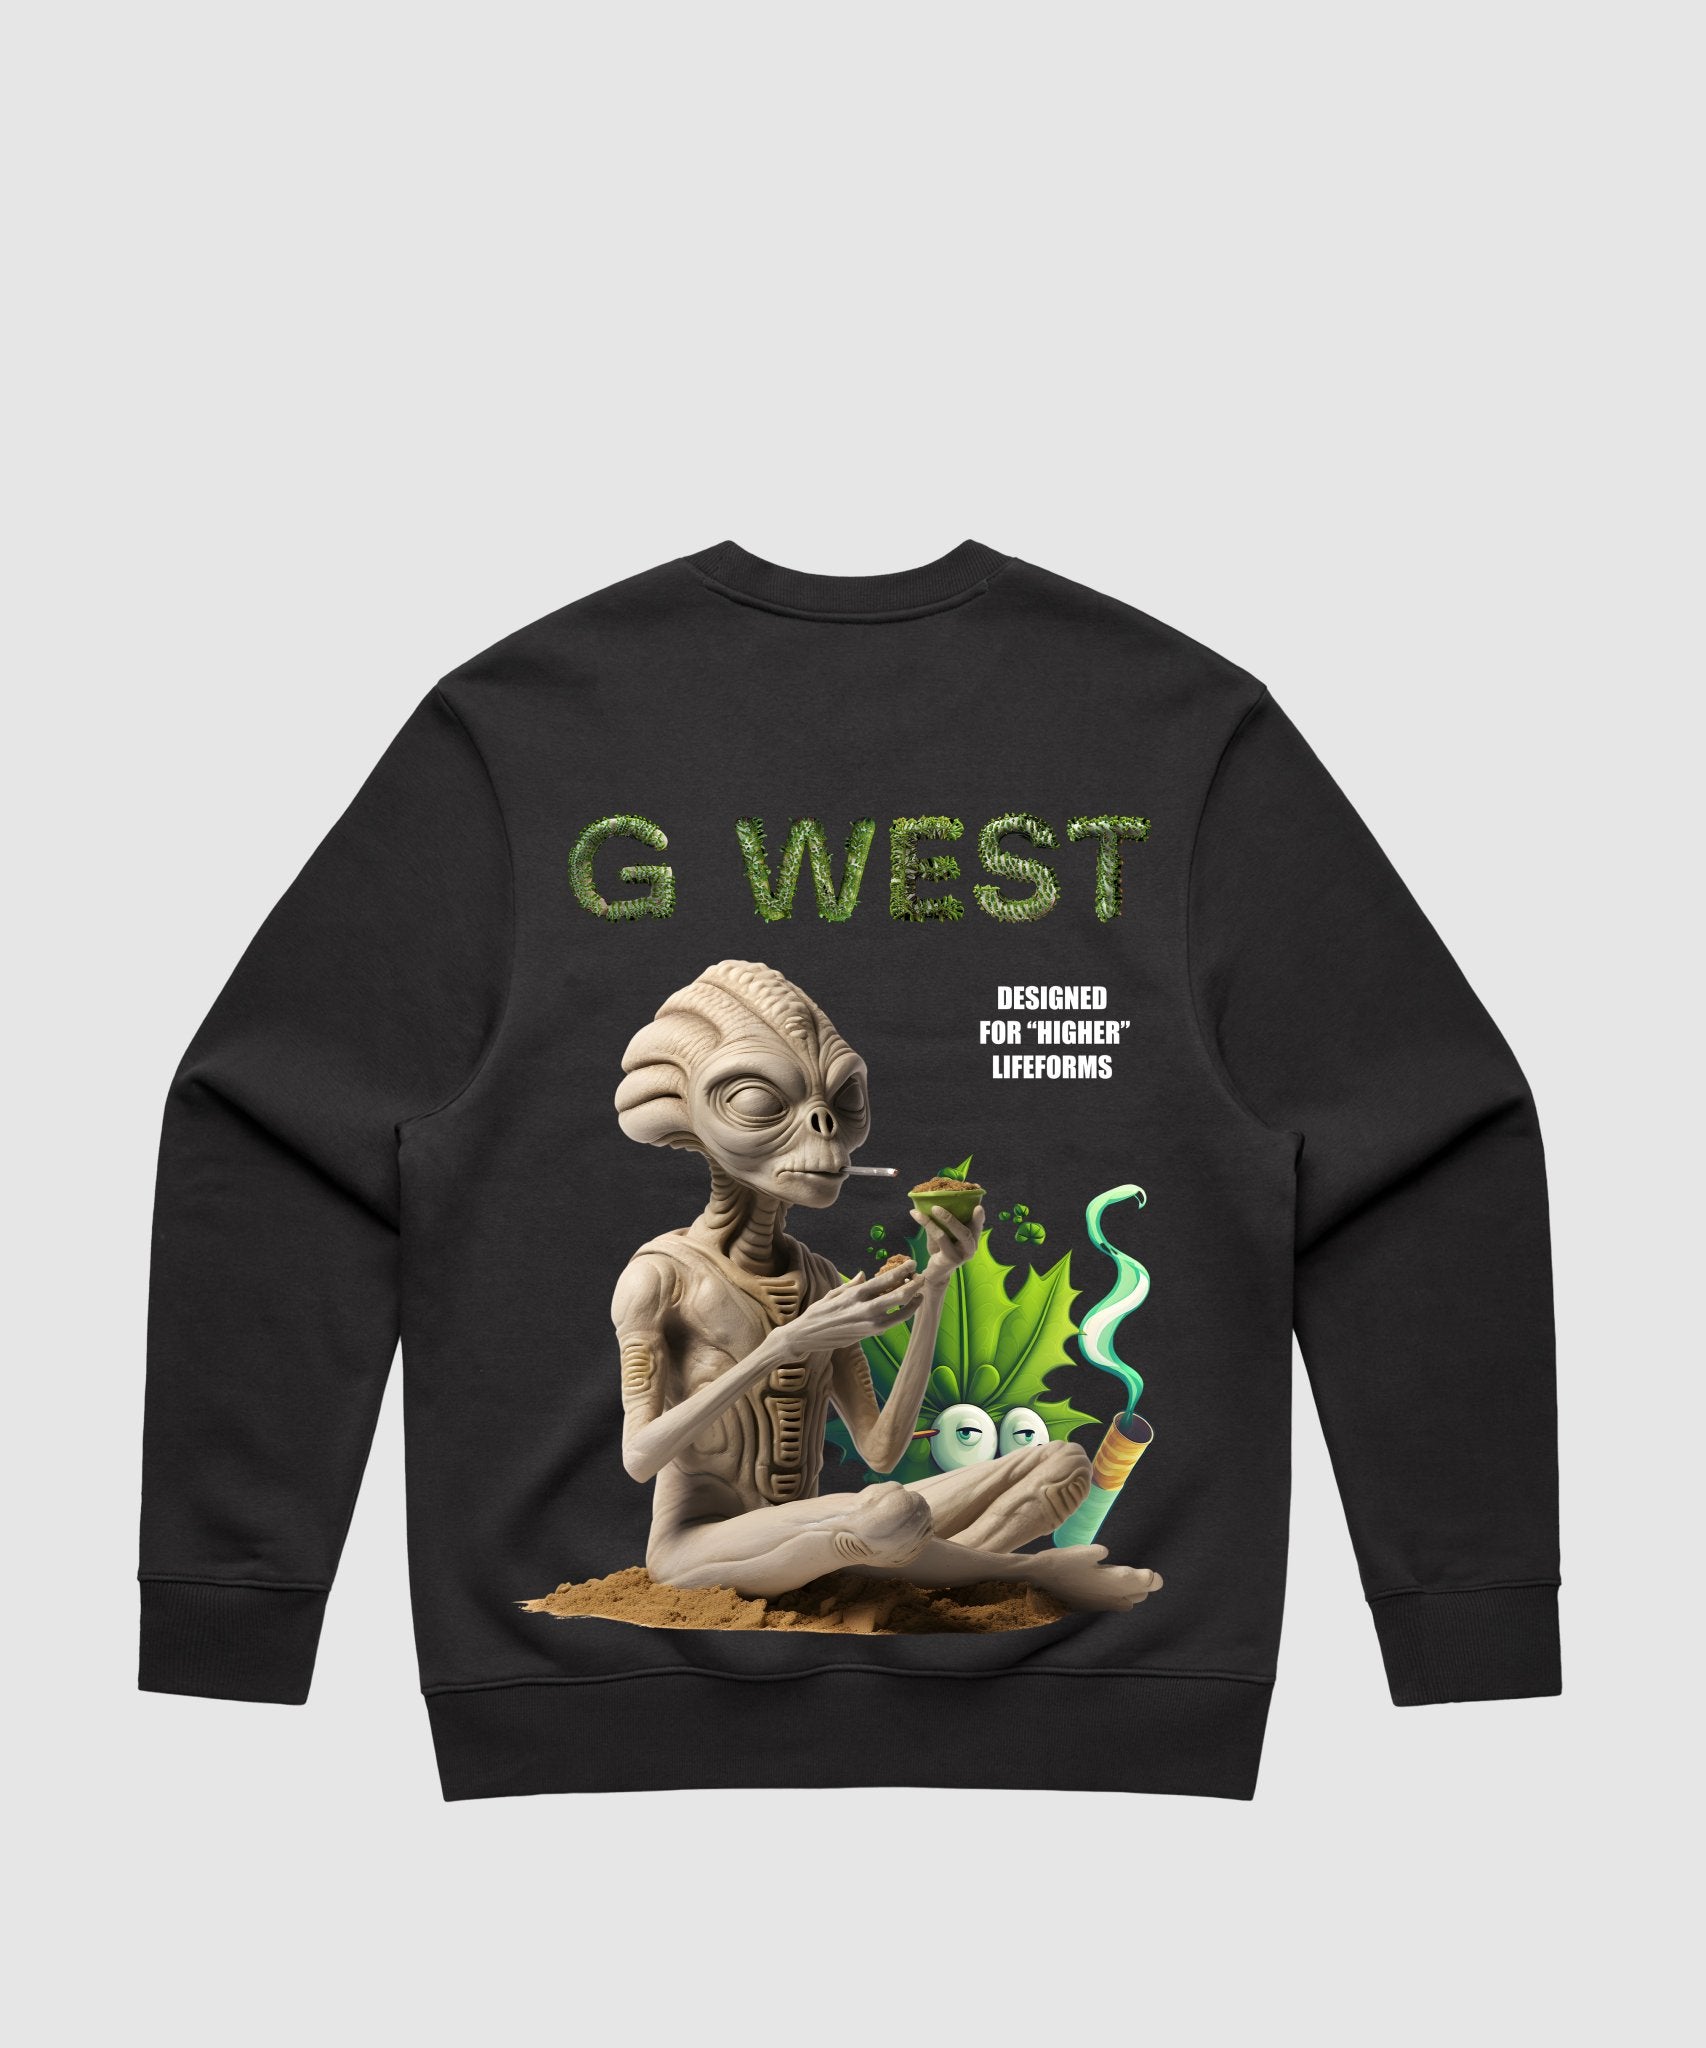 G WEST HIGHER LIFEFROM HEAVY PREMIUM CREWNECK - 6 COLORS - G West